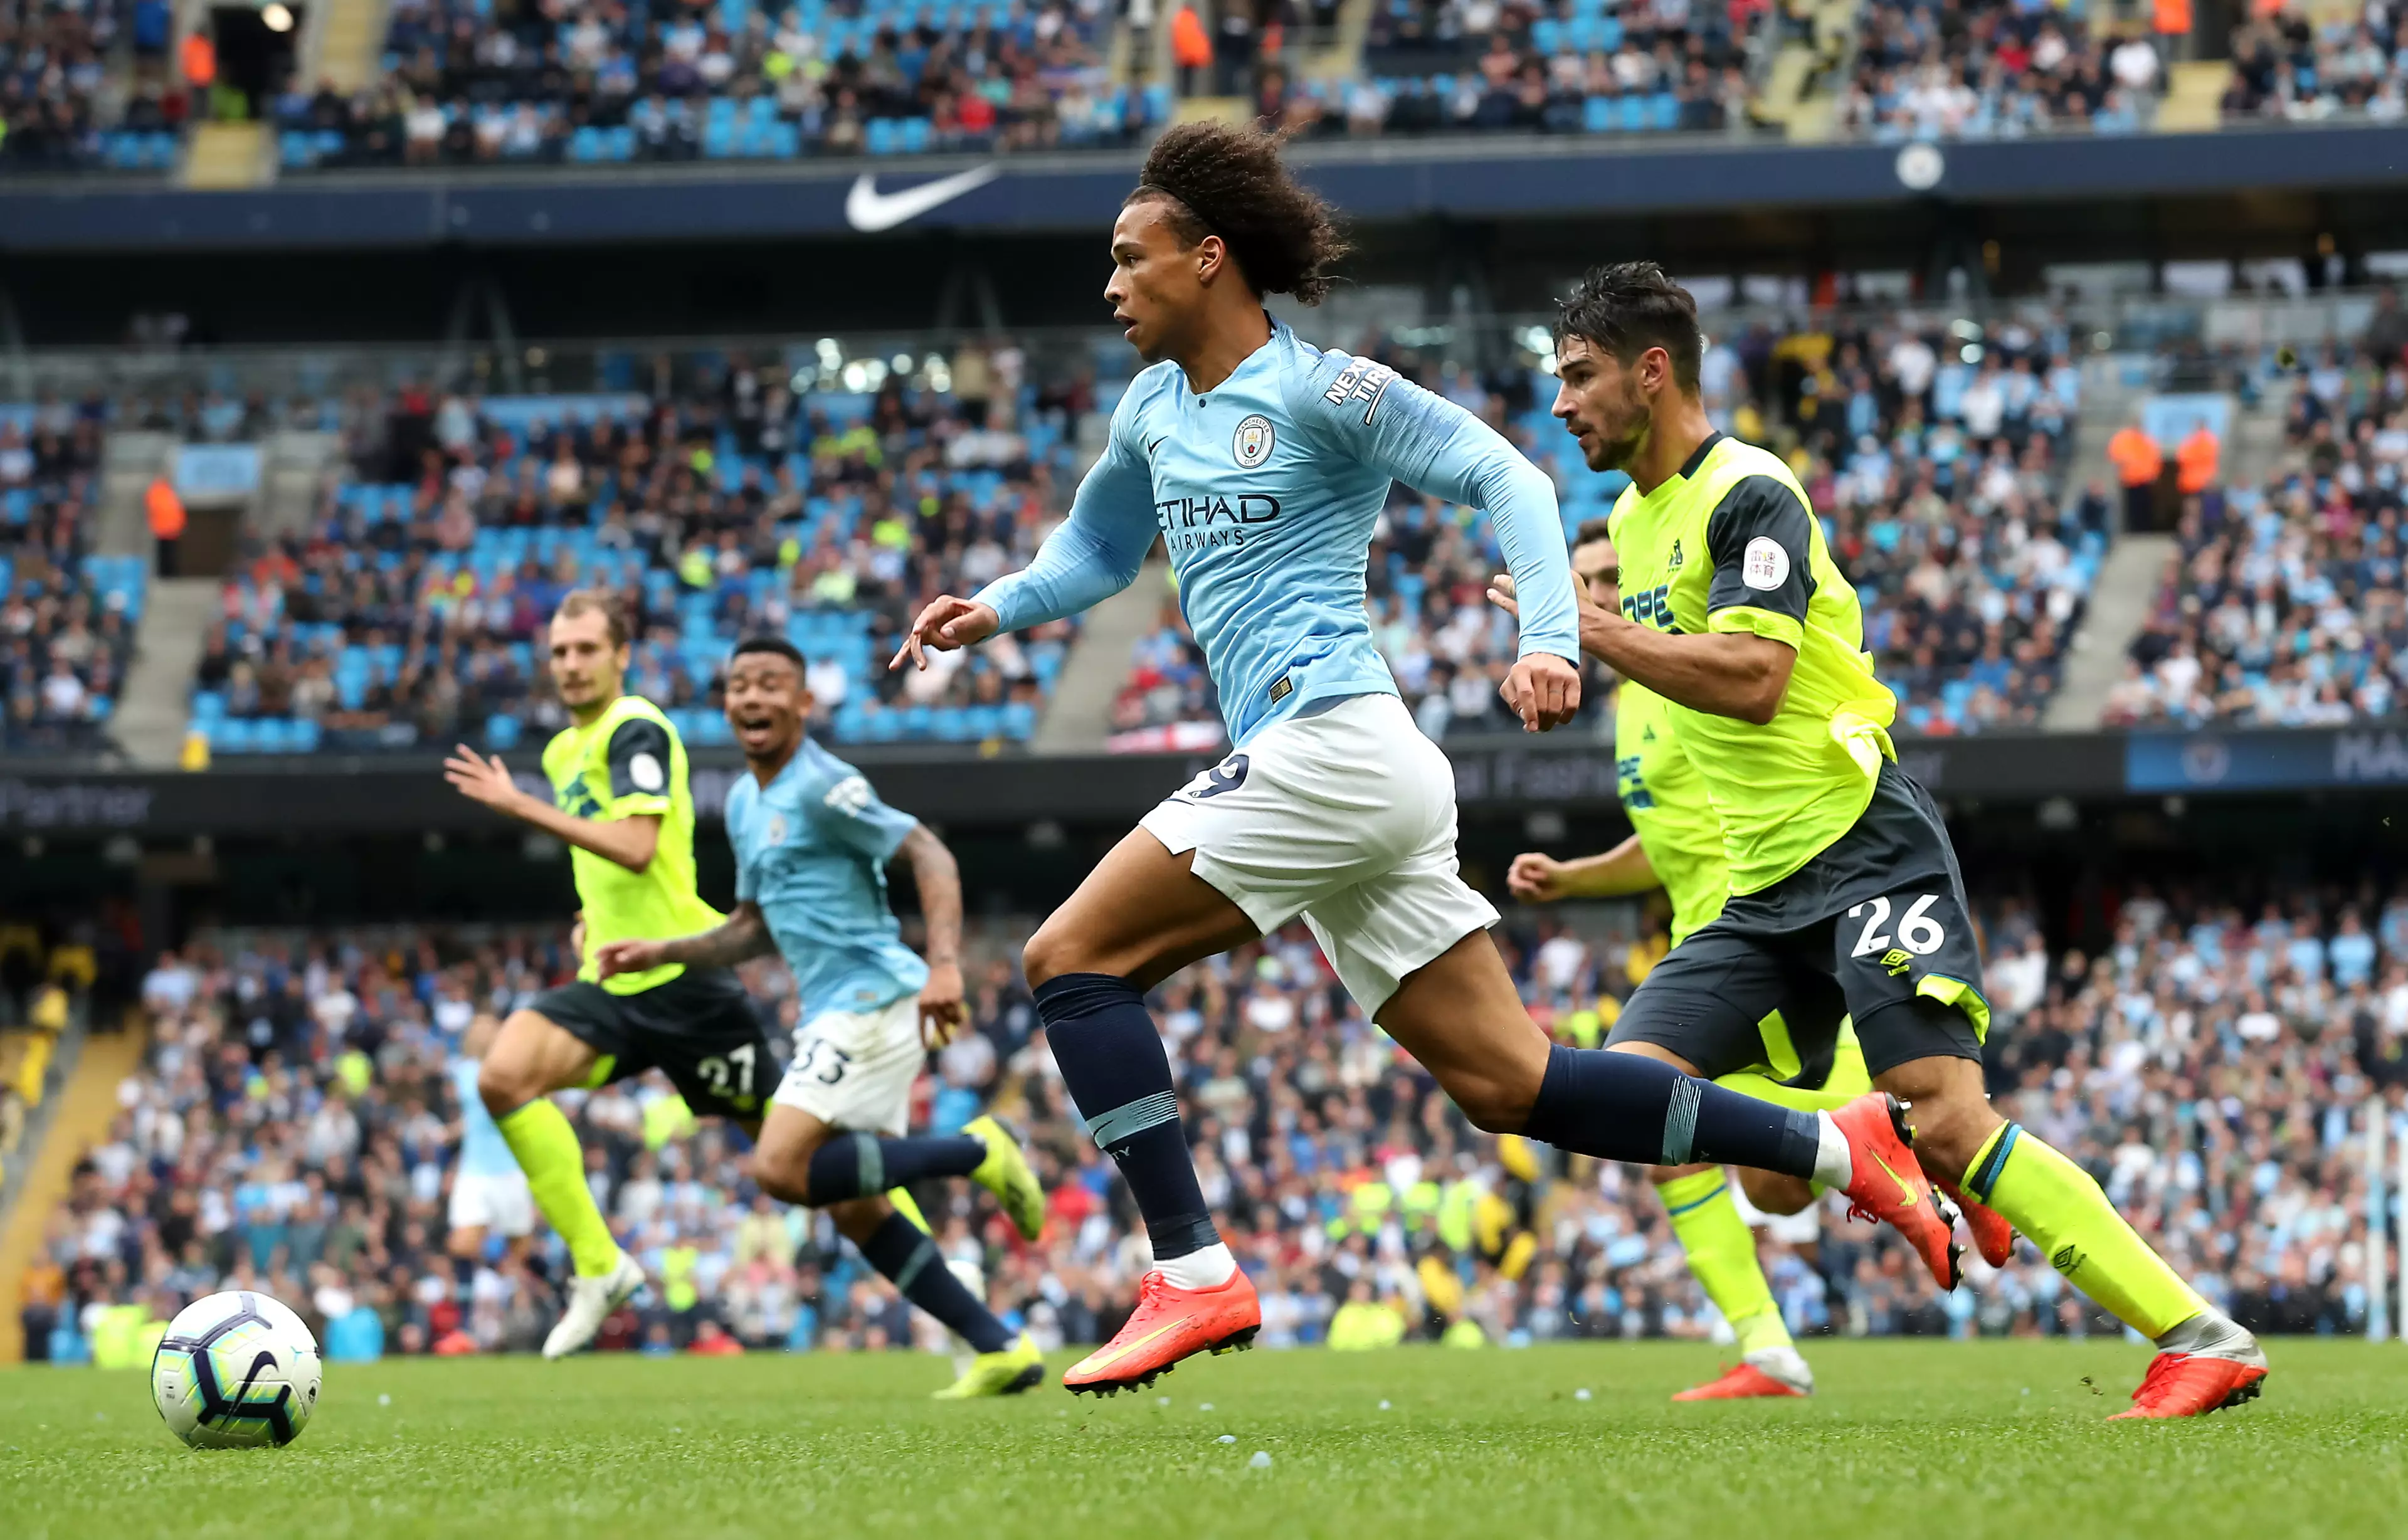 Sane has been linked with Bayern Munch. Image: PA